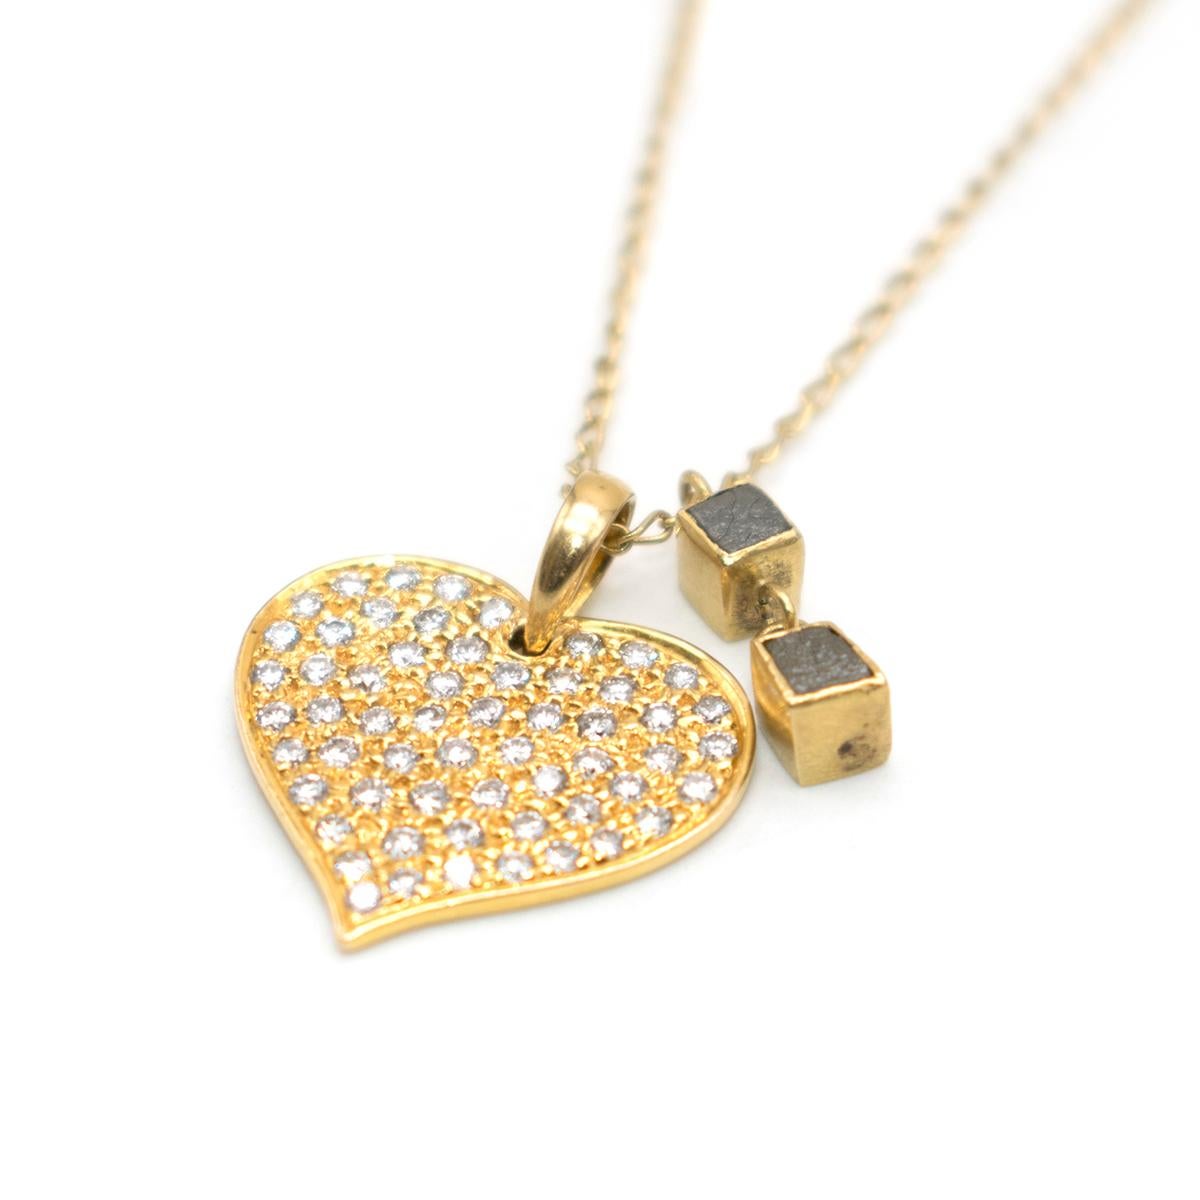 Bespoke 18k Yellow Gold Diamond Heart Long Necklace 

- 18k Yellow Gold 
- Long Double Chained Necklace
- Gold pendant with white diamonds settings
- Cubic pendant details 
- Weight: 5.9g

Please note, these items are pre-owned and may show some